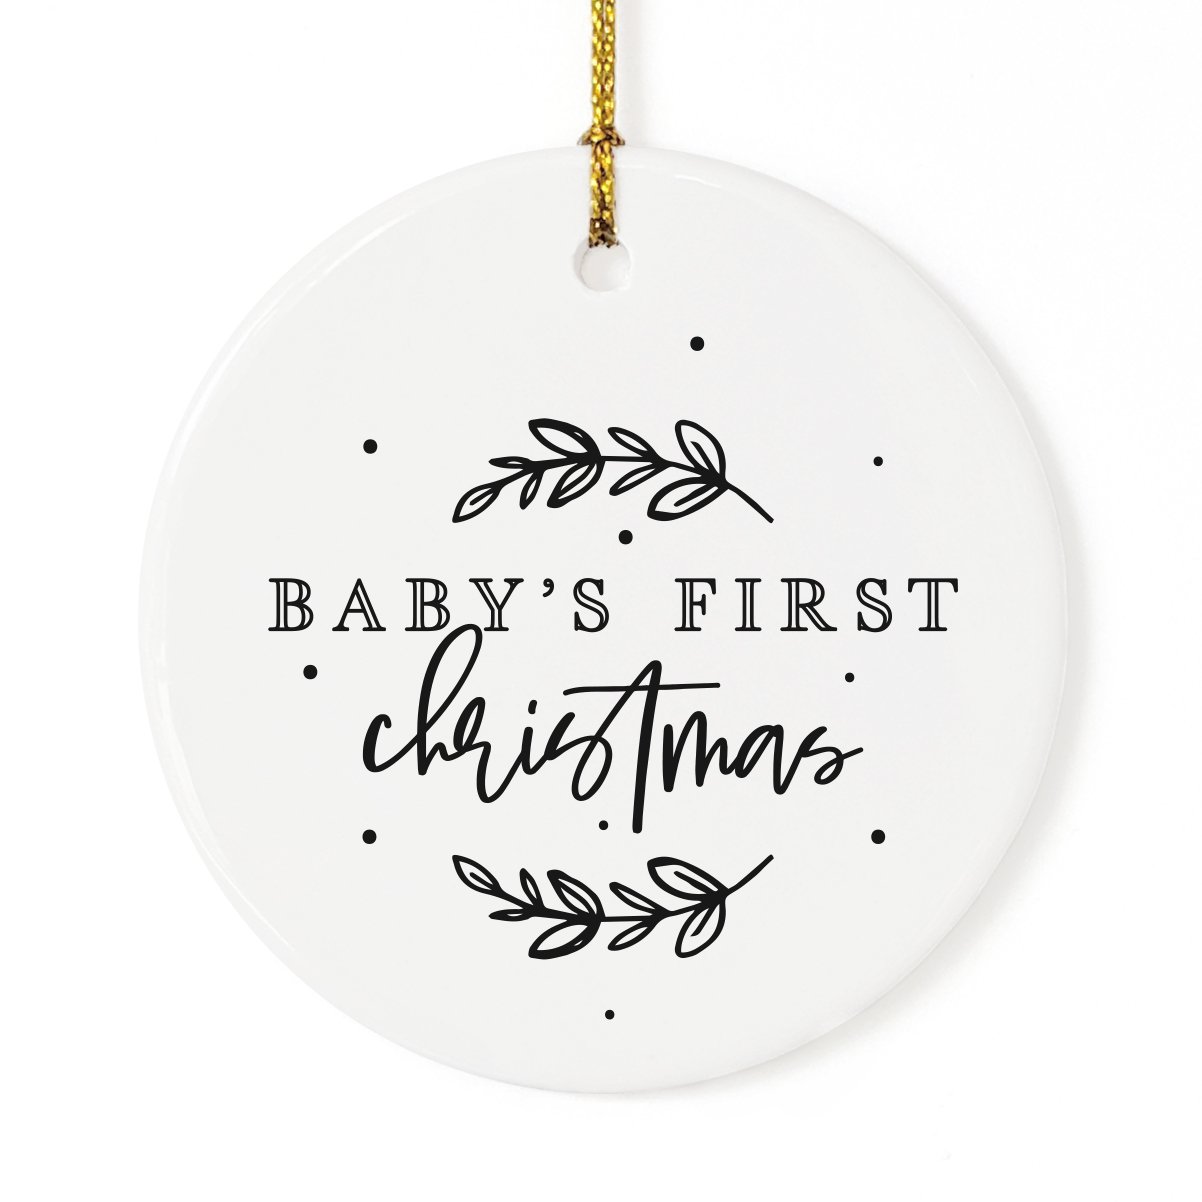 Baby's First Christmas Ornament - image 2 of 4